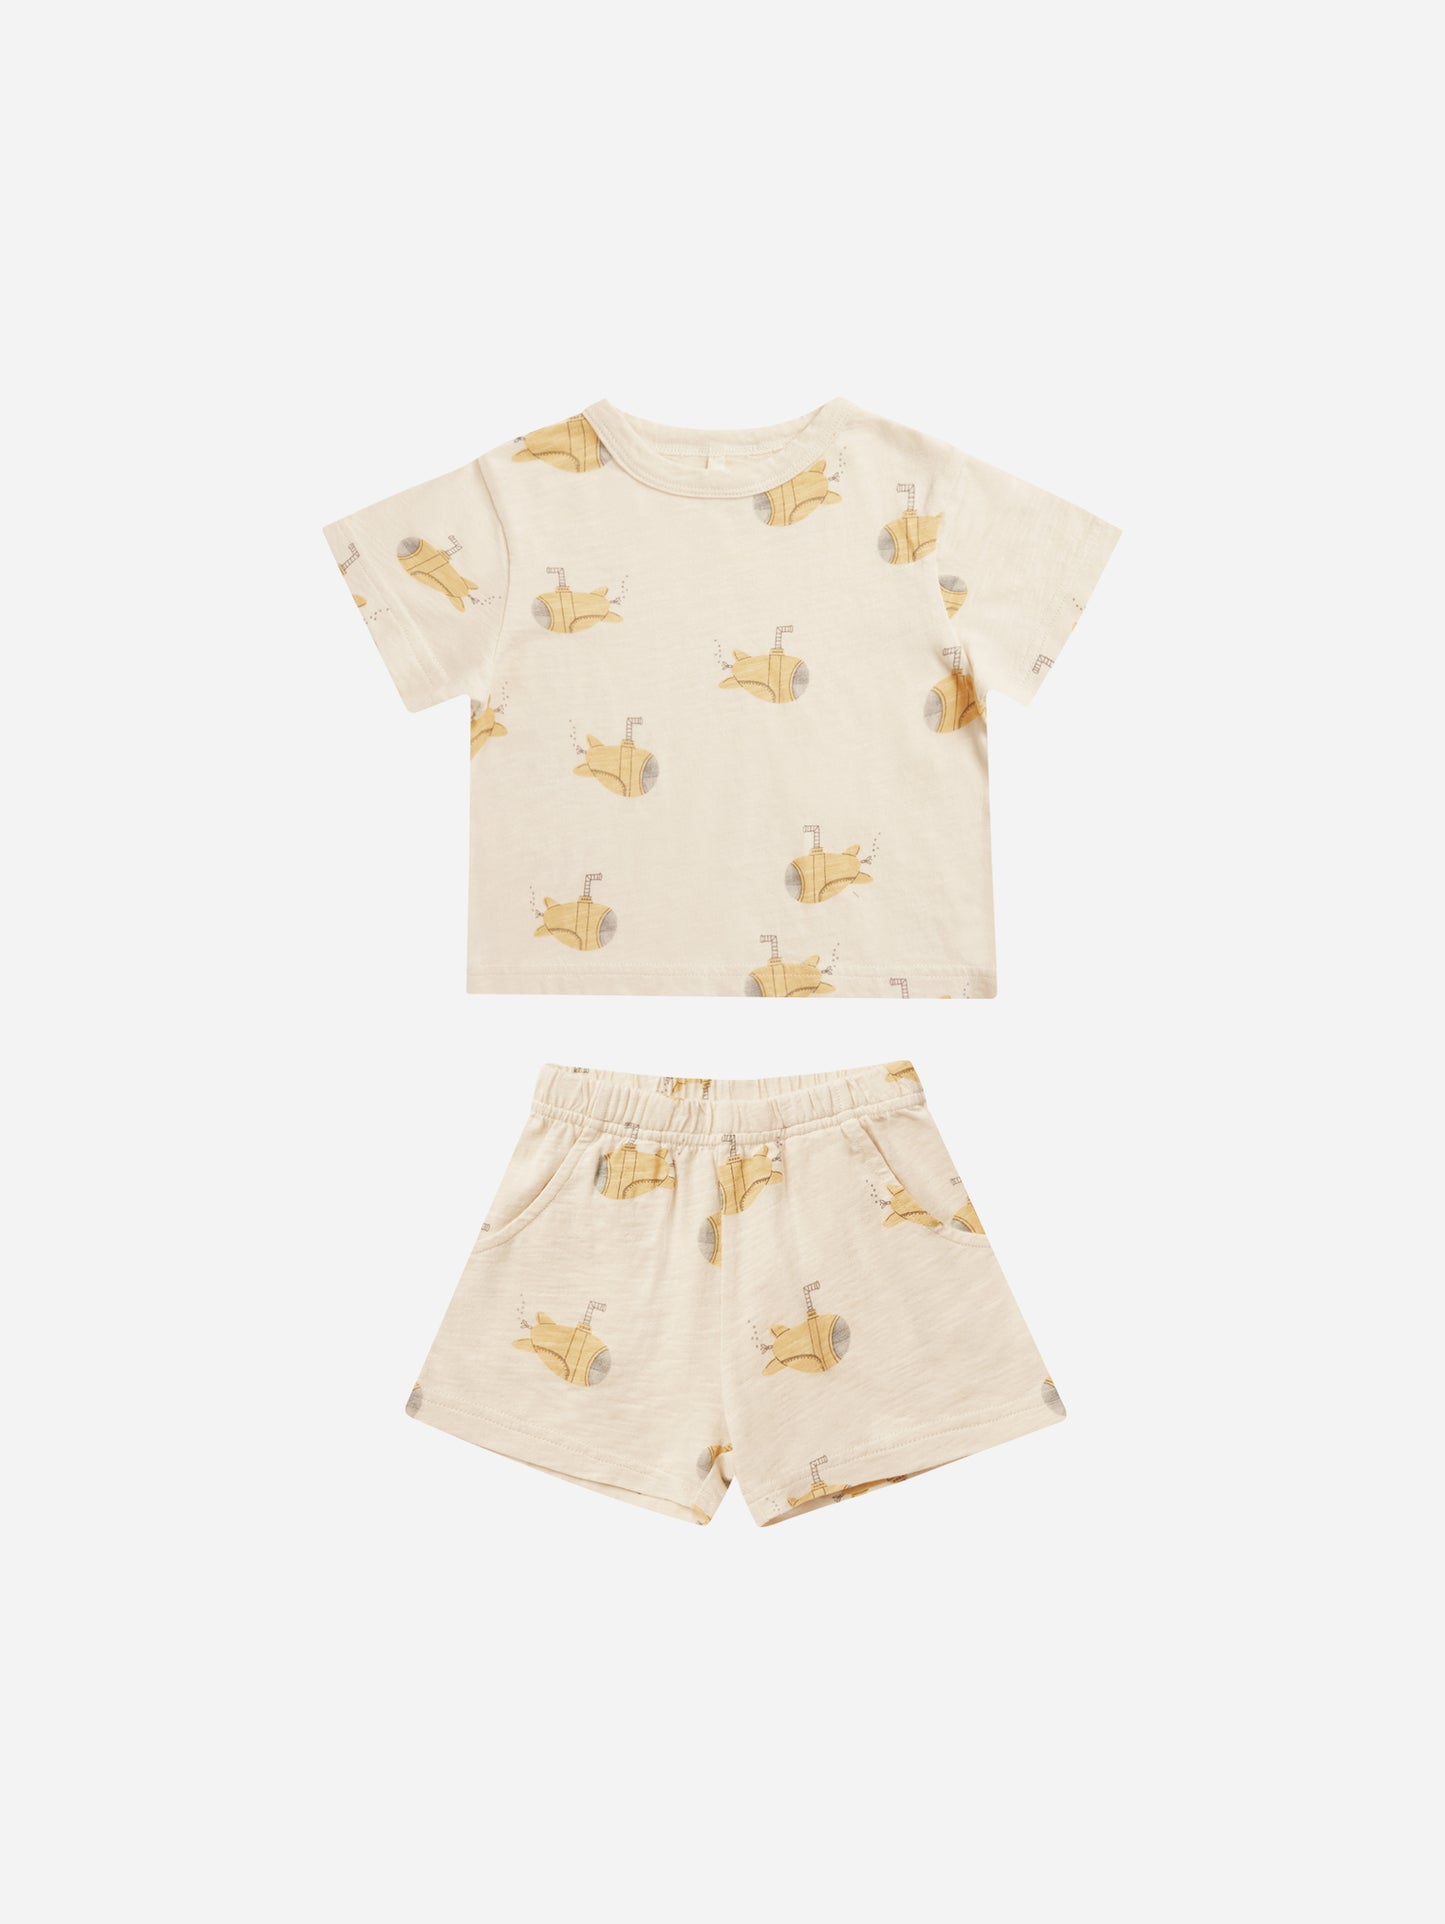 Jersey Set || Submarine - Rylee + Cru | Kids Clothes | Trendy Baby Clothes | Modern Infant Outfits |